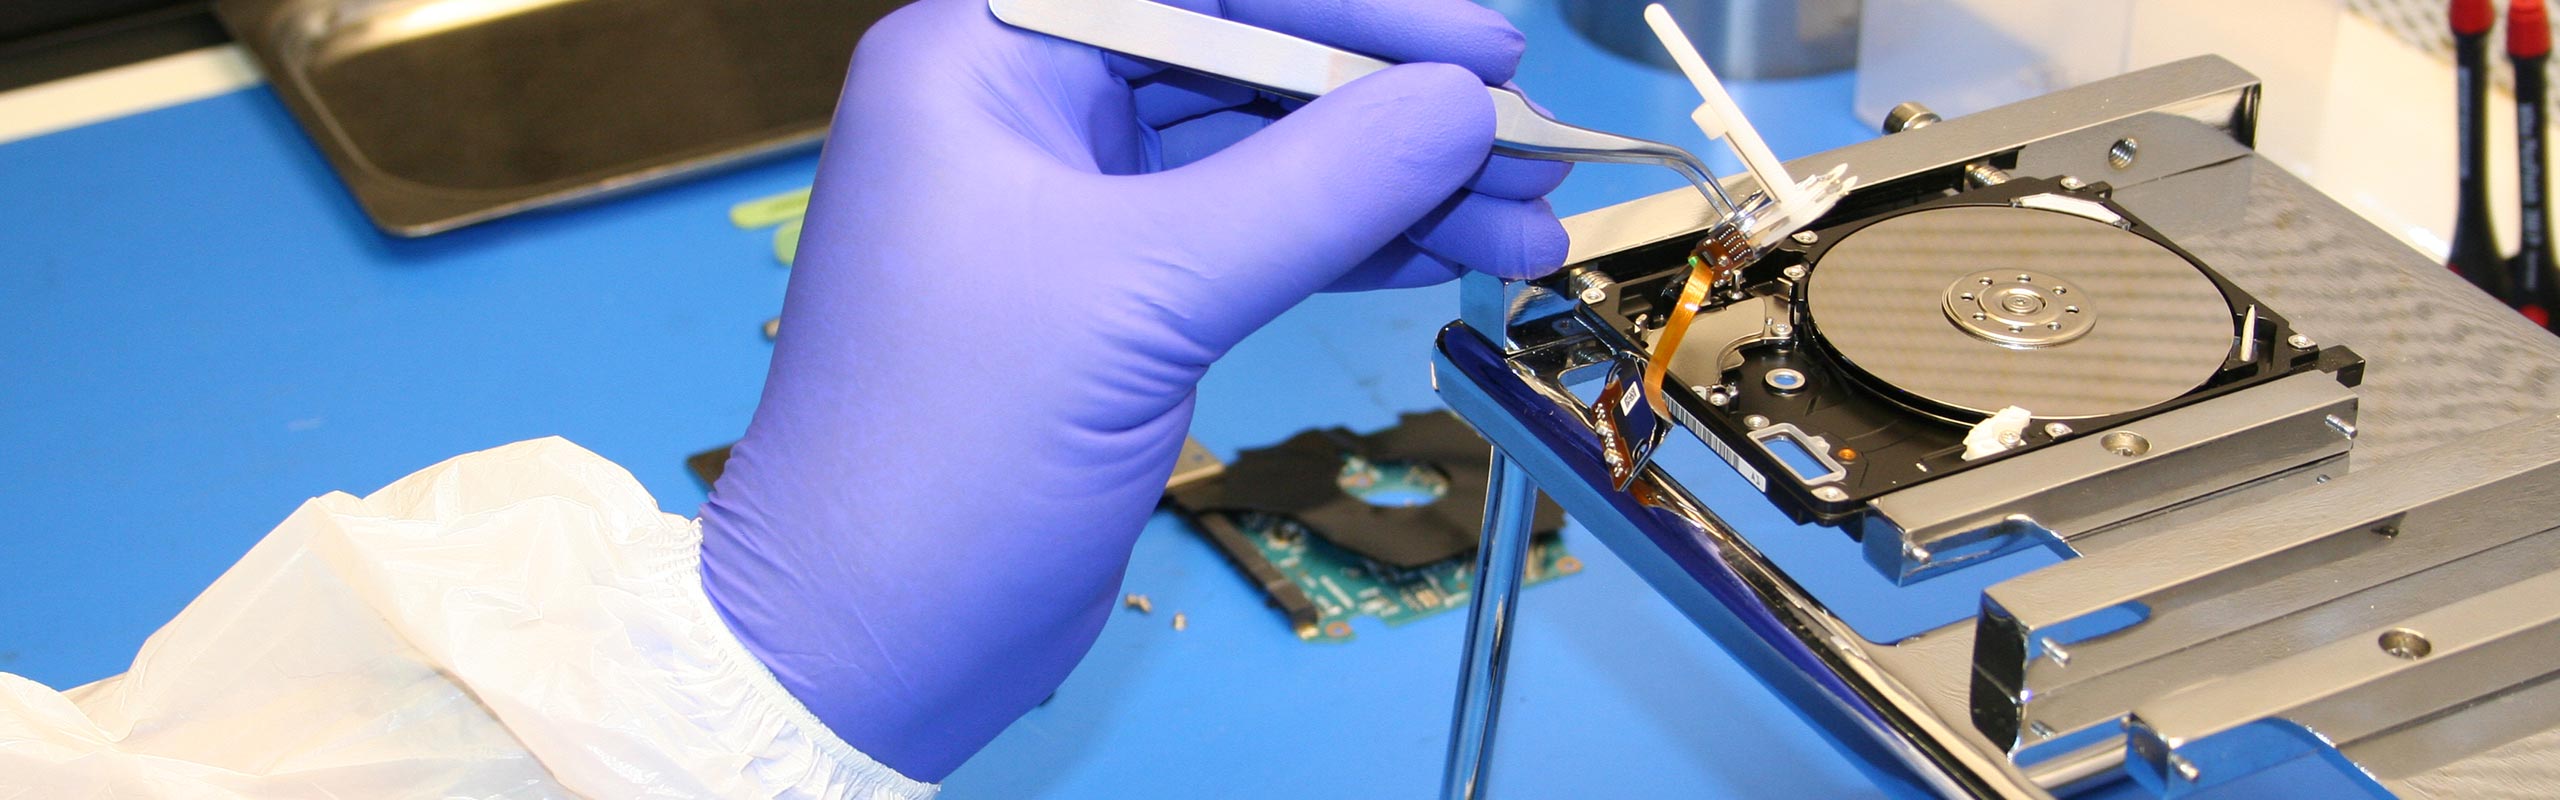 Laptop data recovery header image